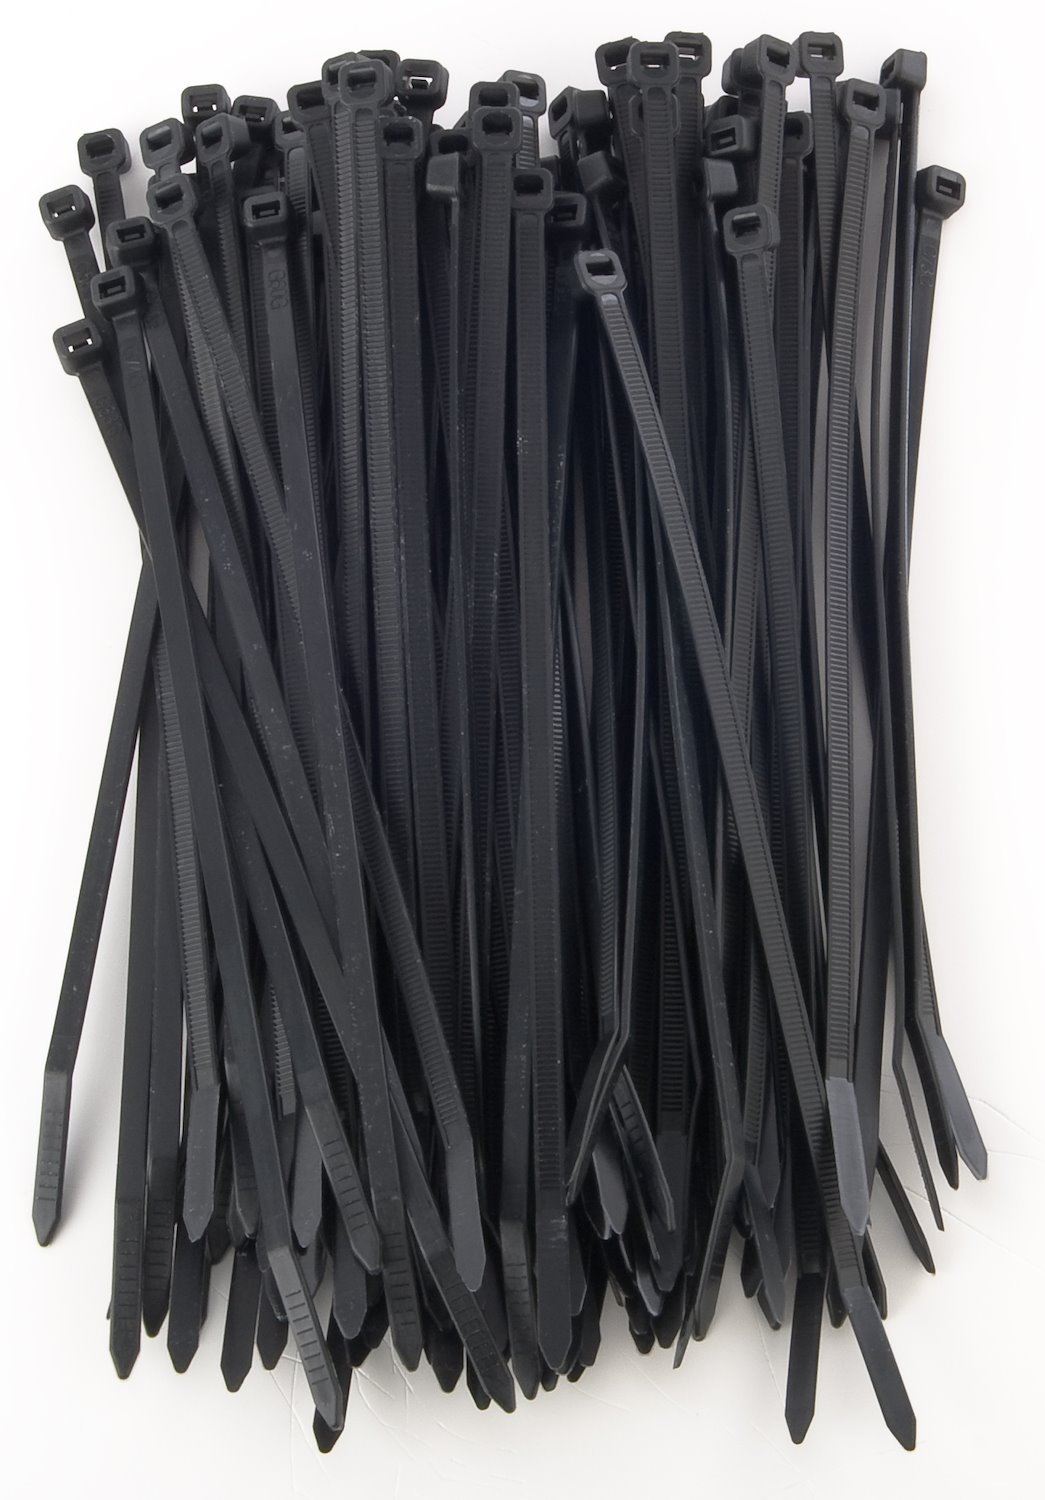 Nylon Wire and Cable Ties [8 in. Black]